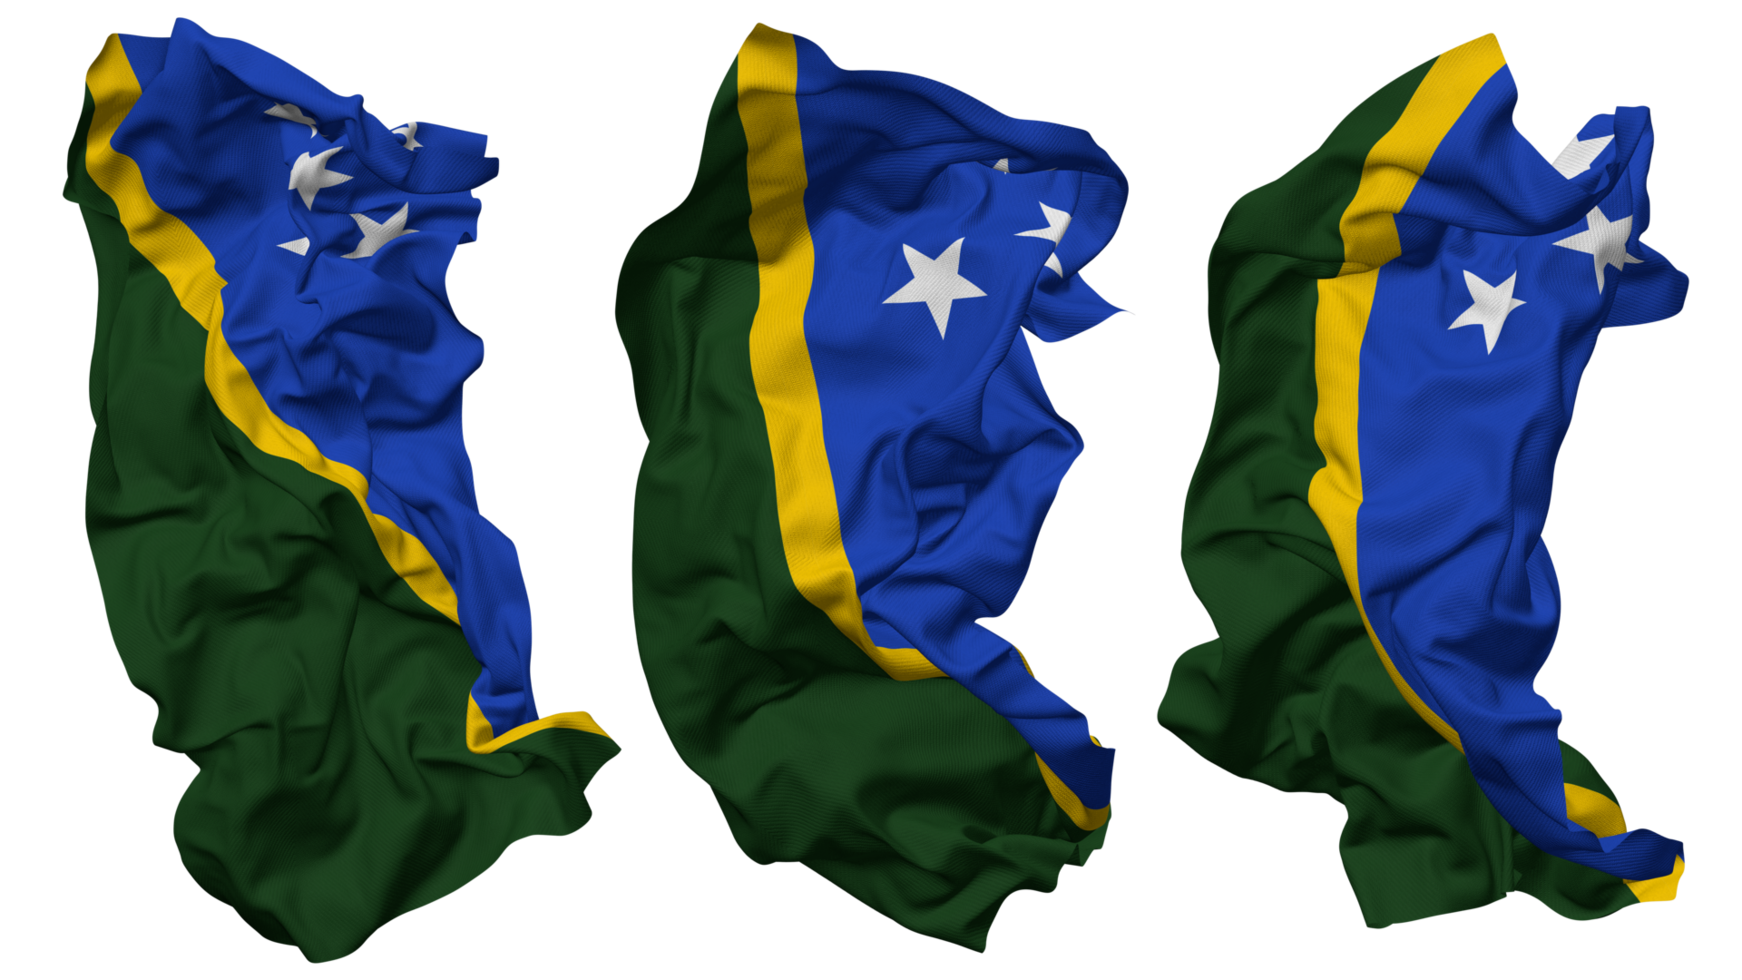 Solomon Islands Flag Waves Isolated in Different Styles with Bump Texture, 3D Rendering png